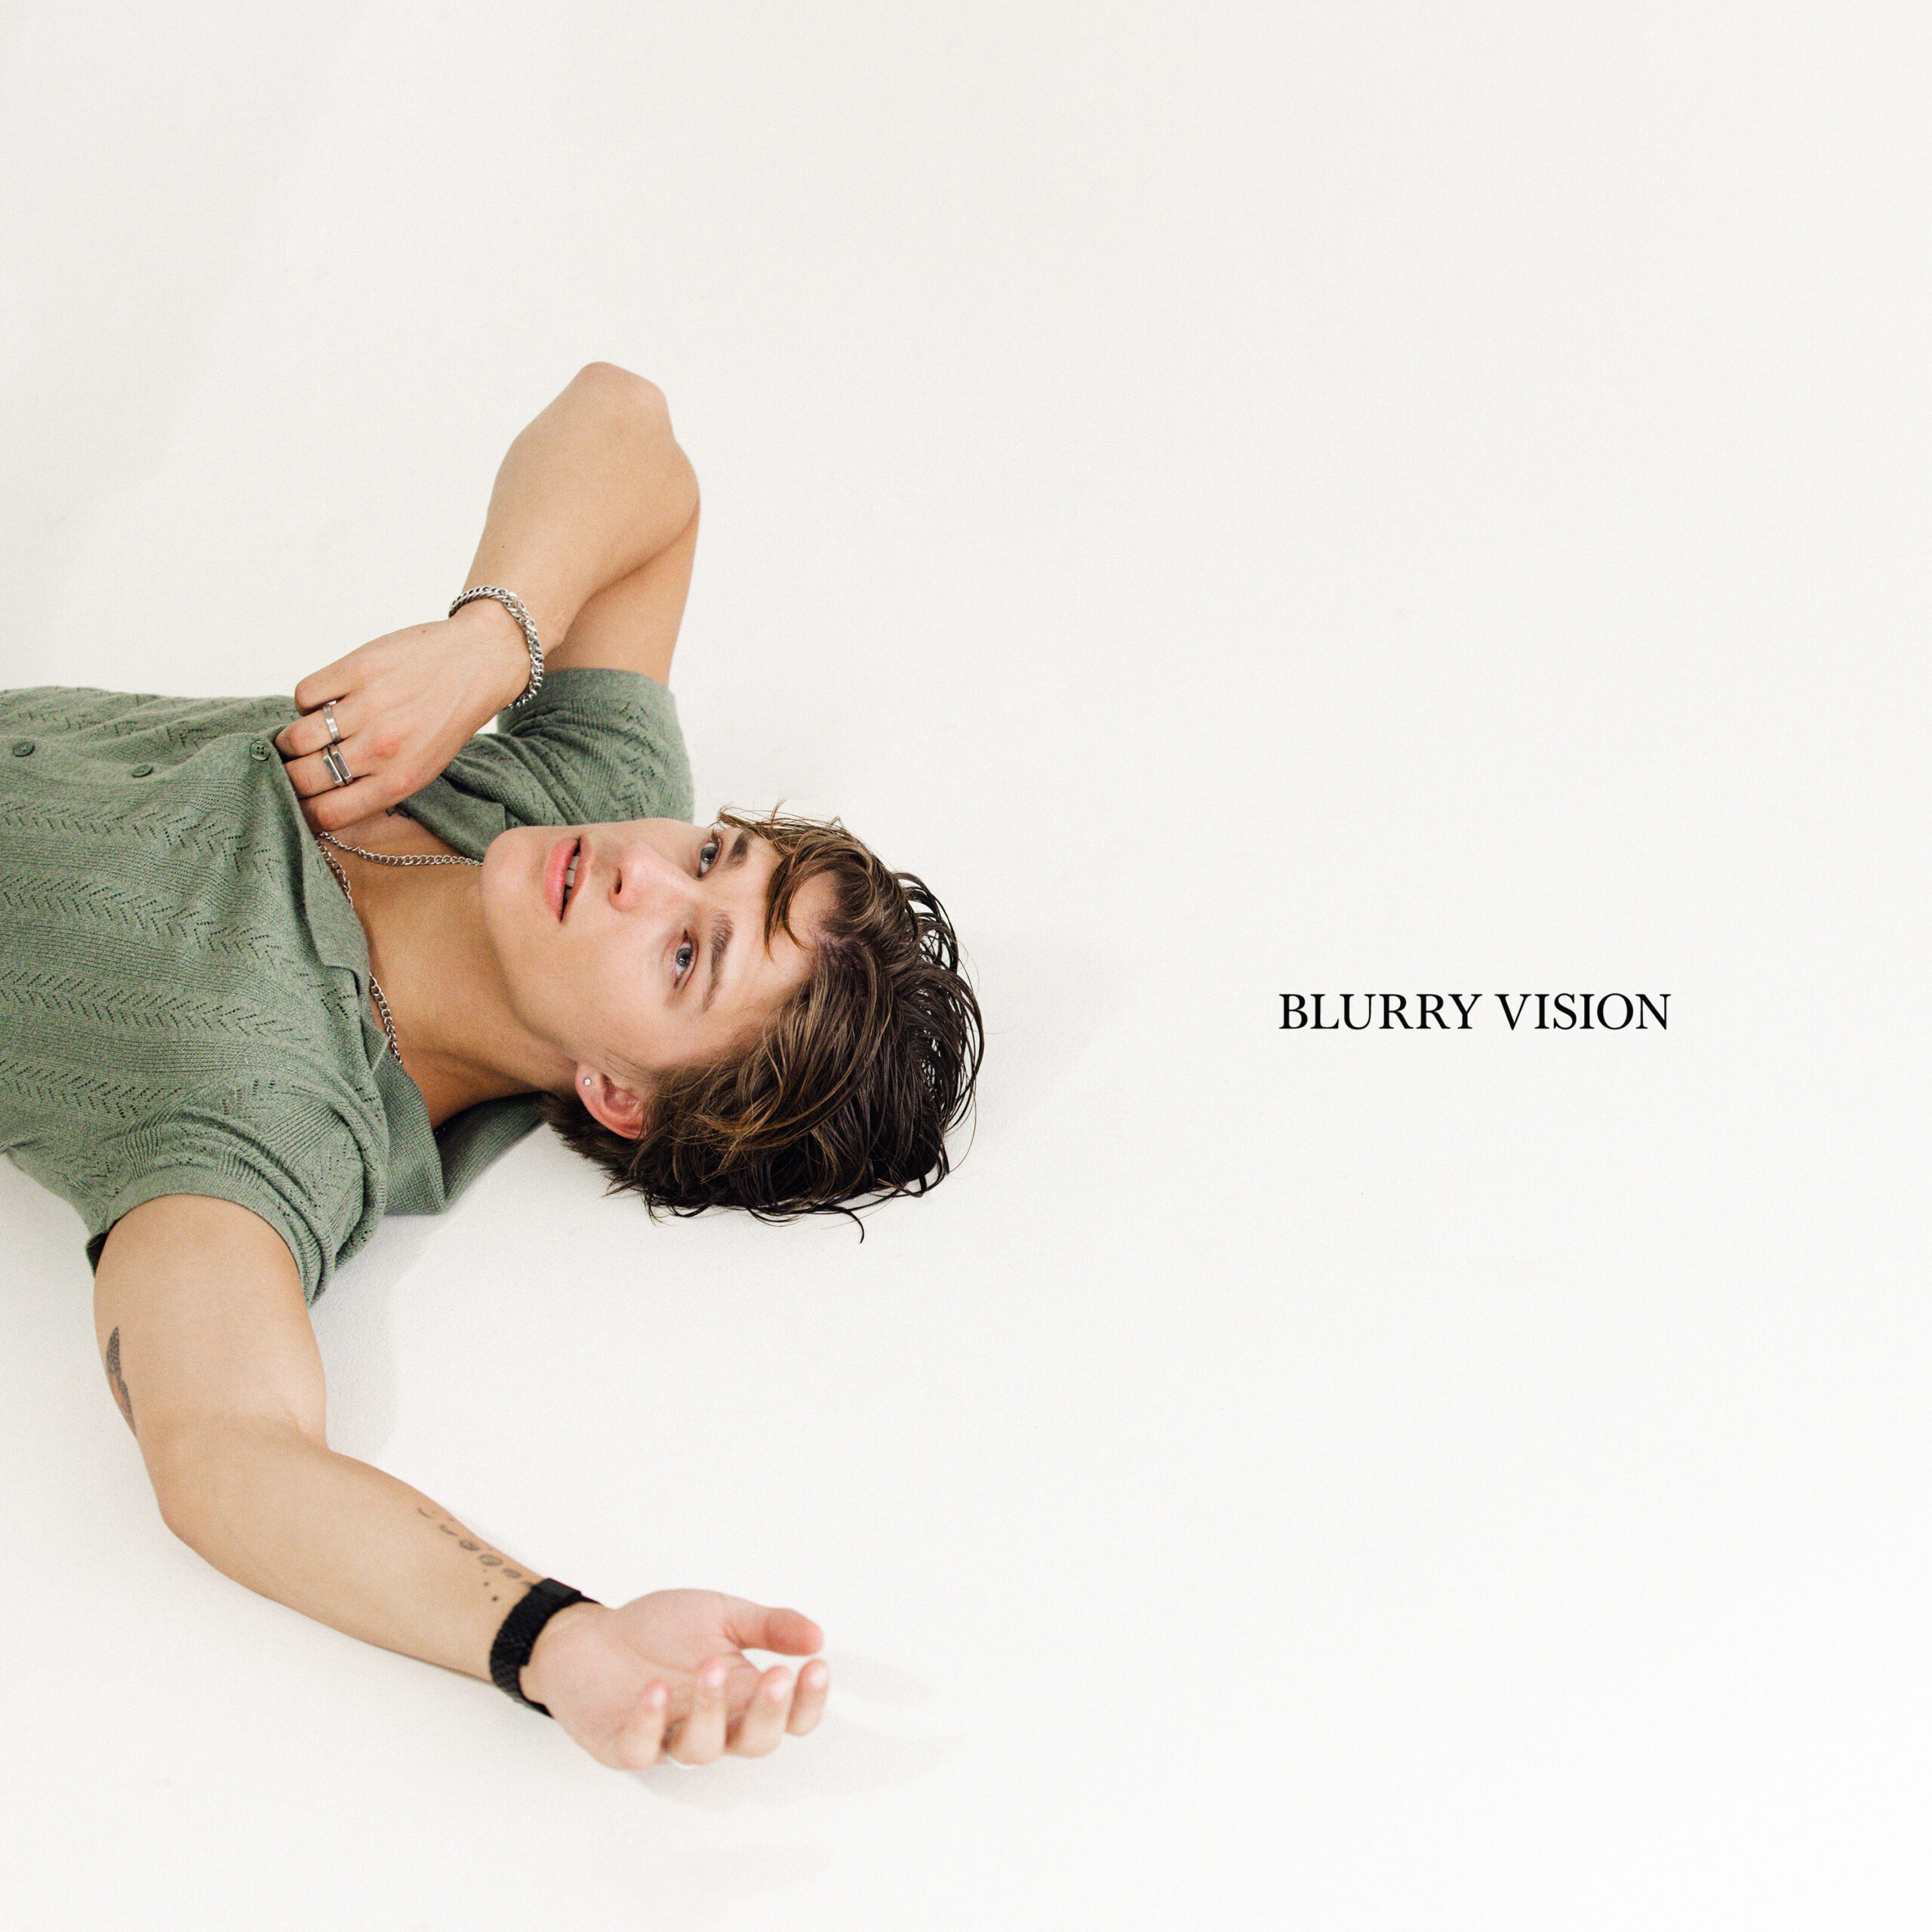 Exclusive Interview: Viral Sensation Alex Sampson On His New EP, ‘Blurry Vision’